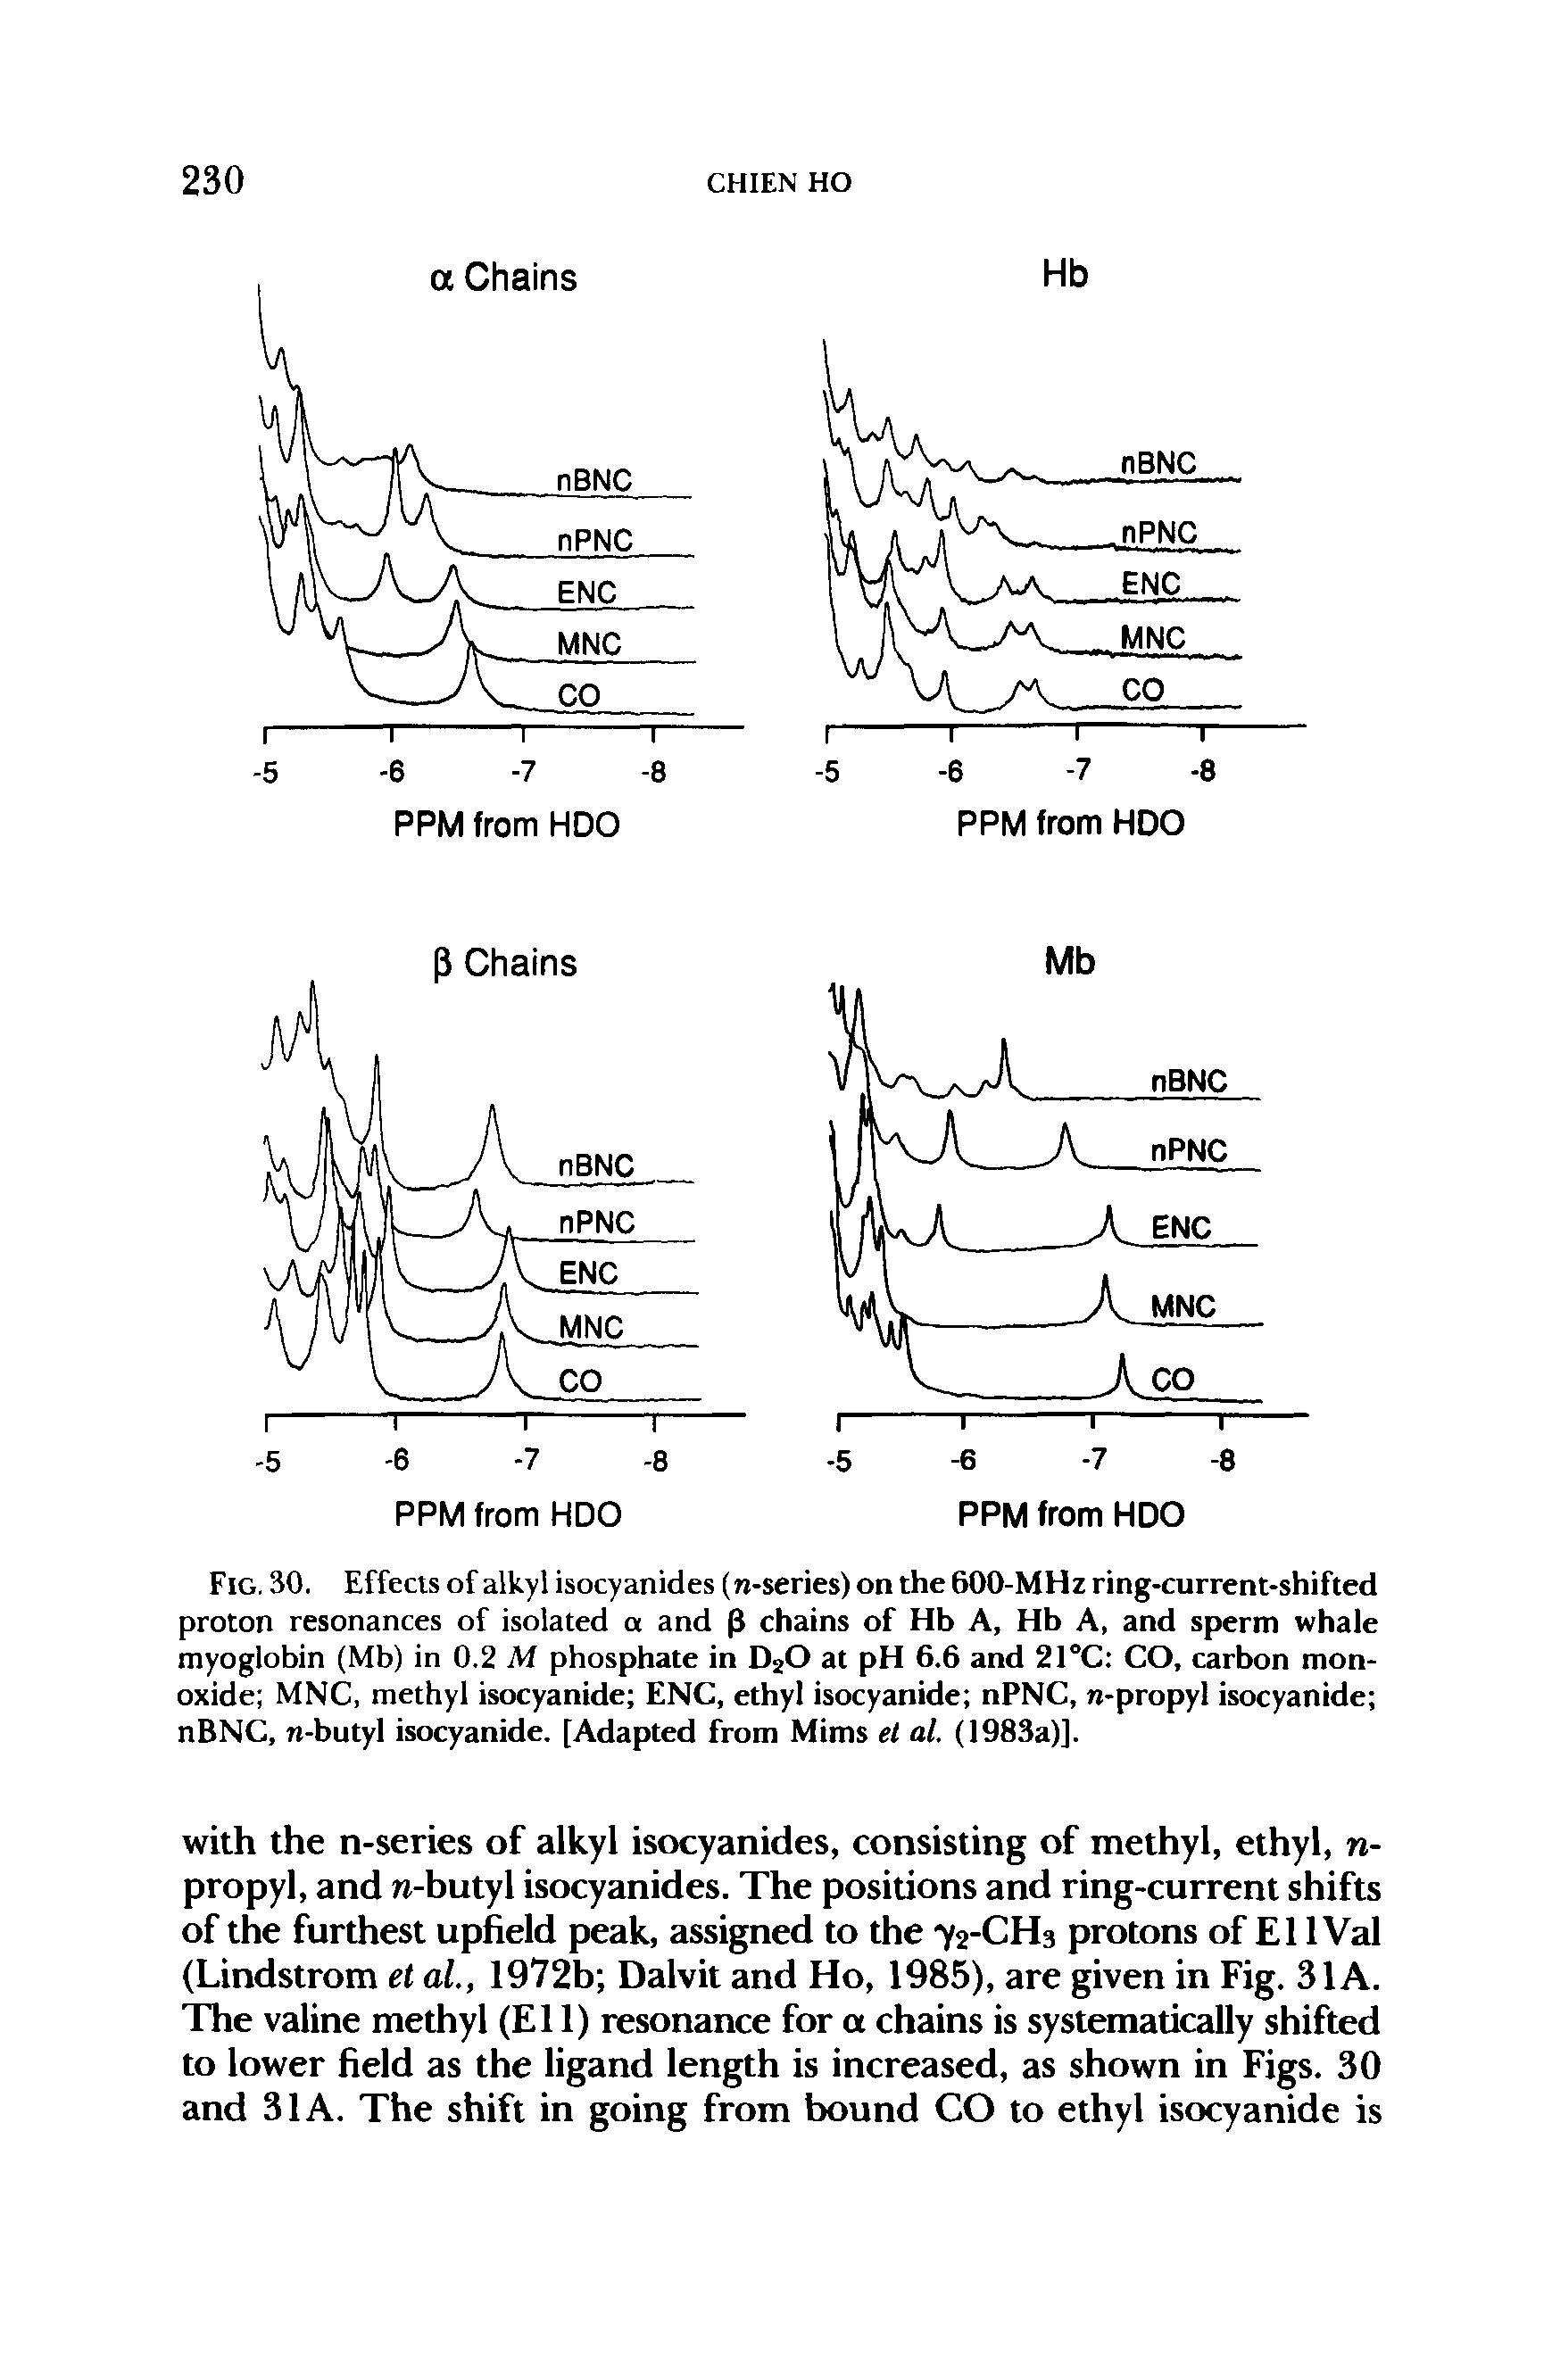 Fig. 30. Effects of alkyl isocyanides (n-series) on the 600-MHz ring-current-shifted proton resonances of isolated a and p chains of Hb A, Hb A, and sperm whale myoglobin (Mb) in 0.2 M phosphate in D20 at pH 6.6 and 21°C CO, carbon monoxide MNC, methyl isocyanide ENC, ethyl isocyanide nPNC, n-propyl isocyanide nBNC, n-butyl isocyanide. [Adapted from Mims el al. (1983a)].